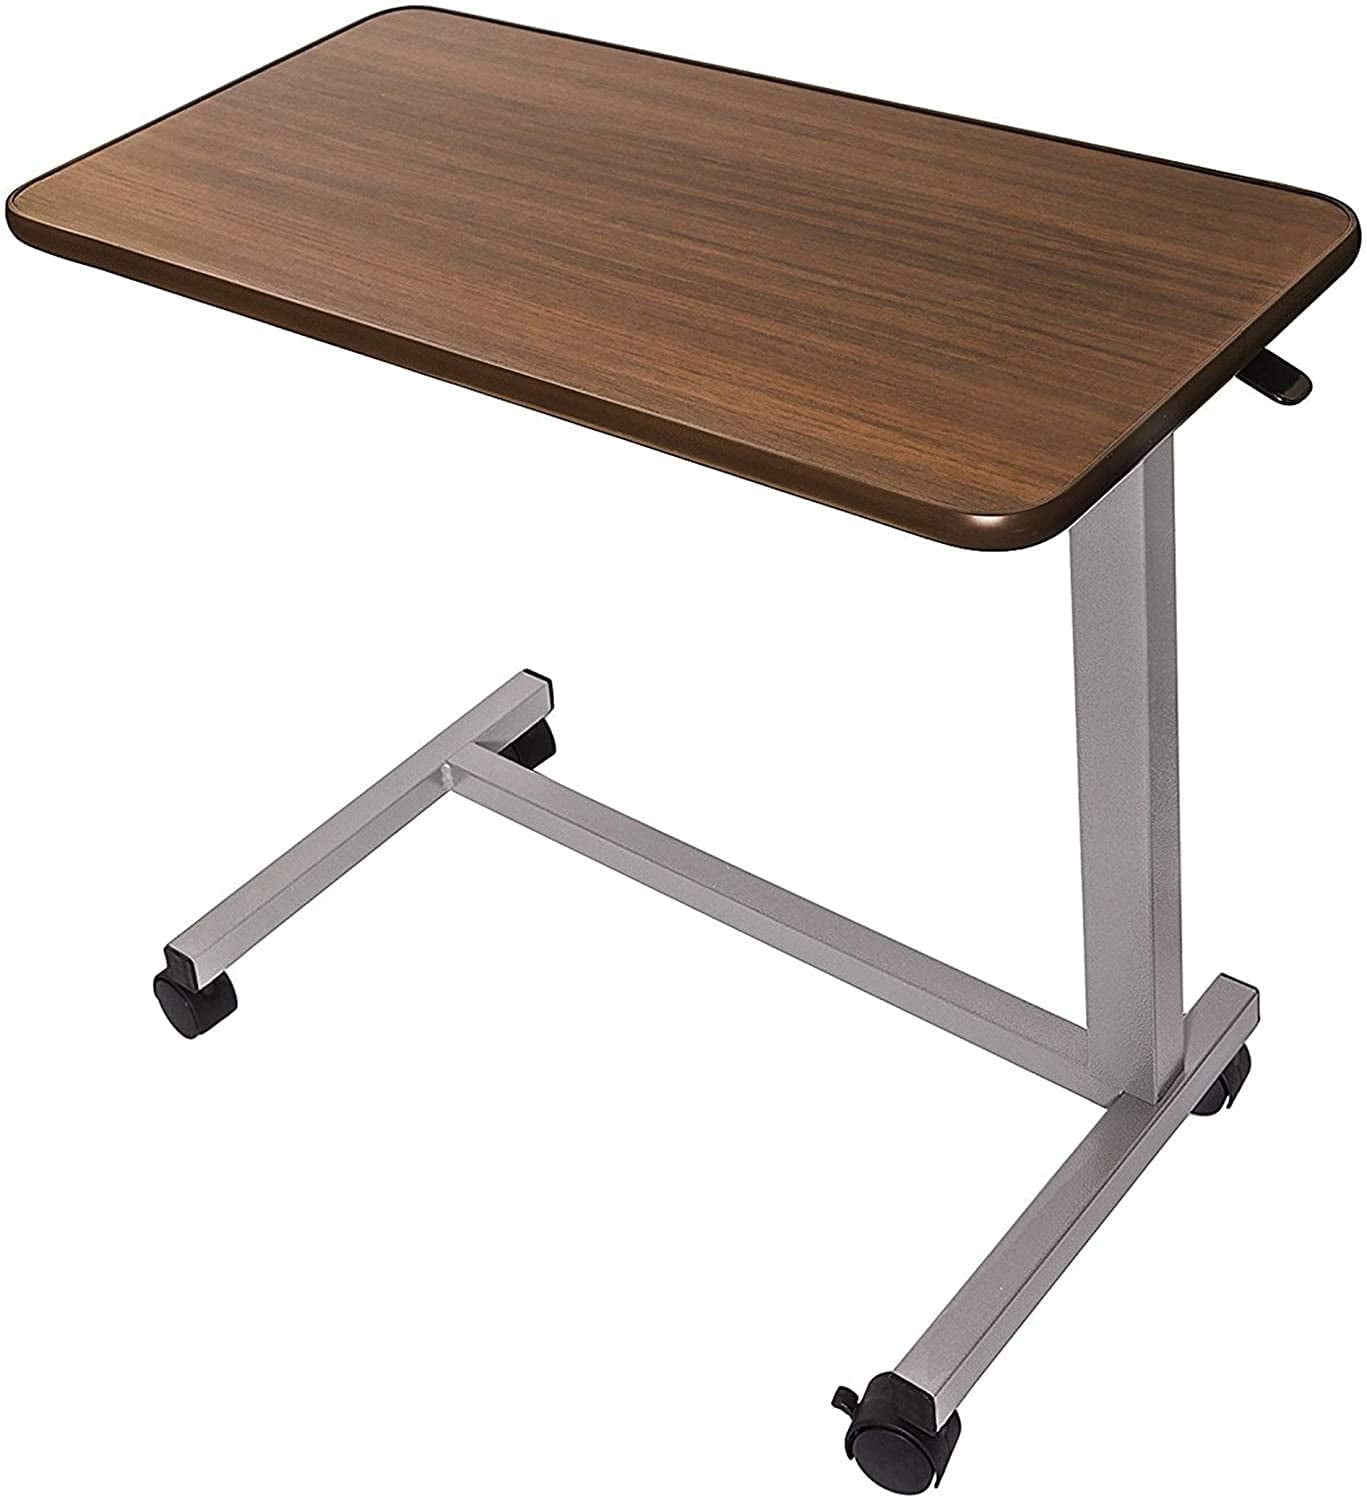 Overbed Table with Wheels,Balee Over Bed Table Height Adjustable Table Bedside Table Rolling Cart Laptop Desk Medical Overbed Tables Multi-Purpose Portable Tables. 